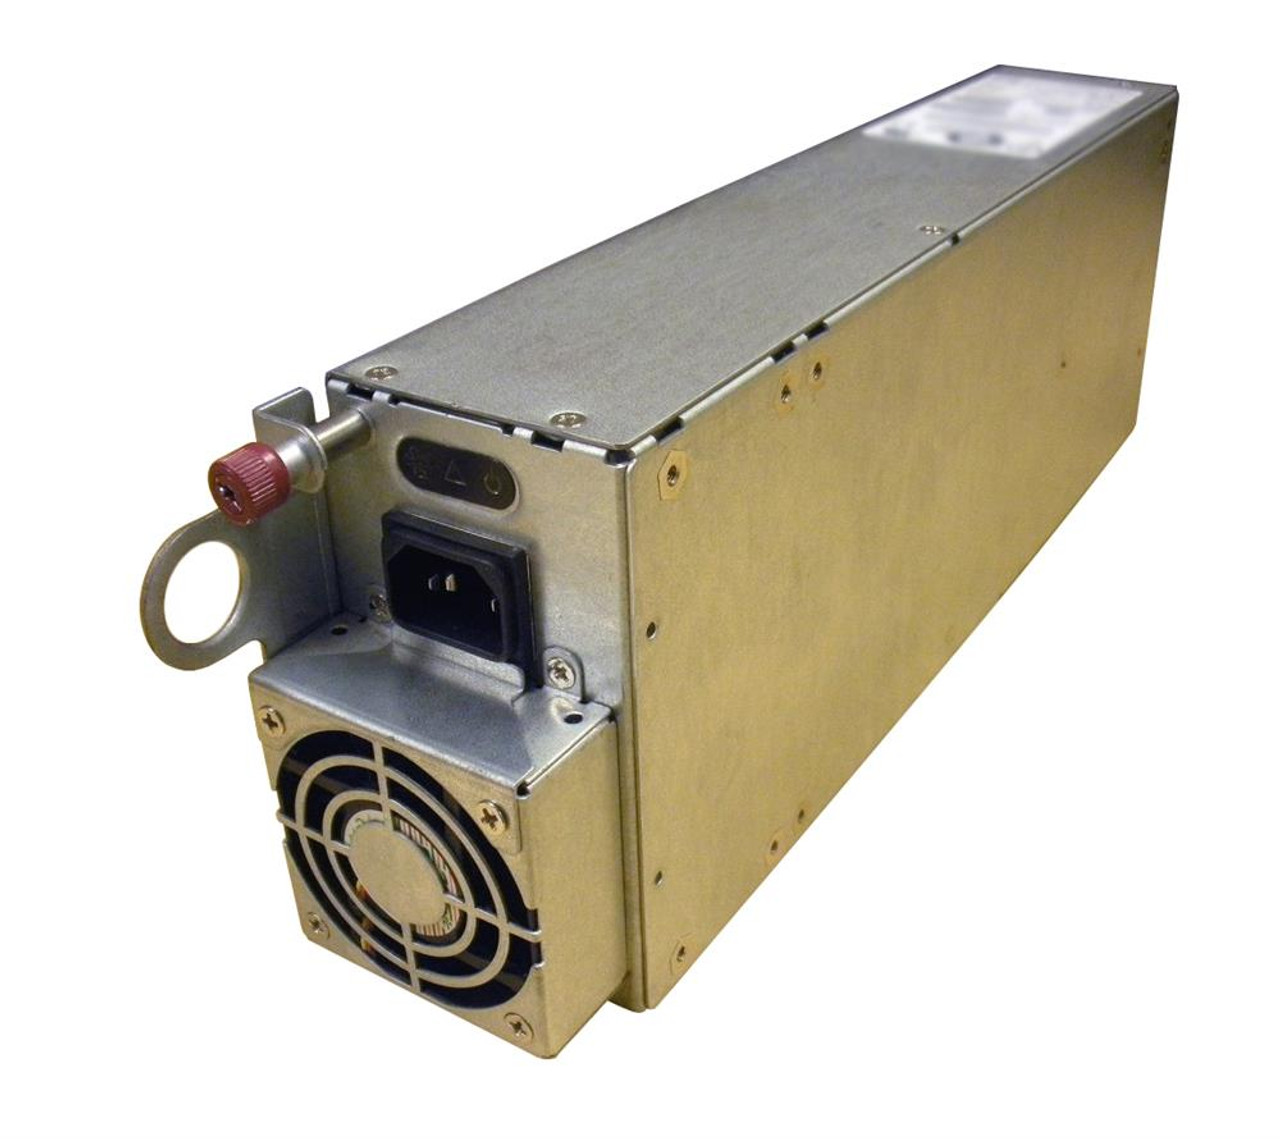 A6961-67125 HP 1200-Watts Hot Swap Redundant AC Power Supply for RX4640-8 Integrity Server